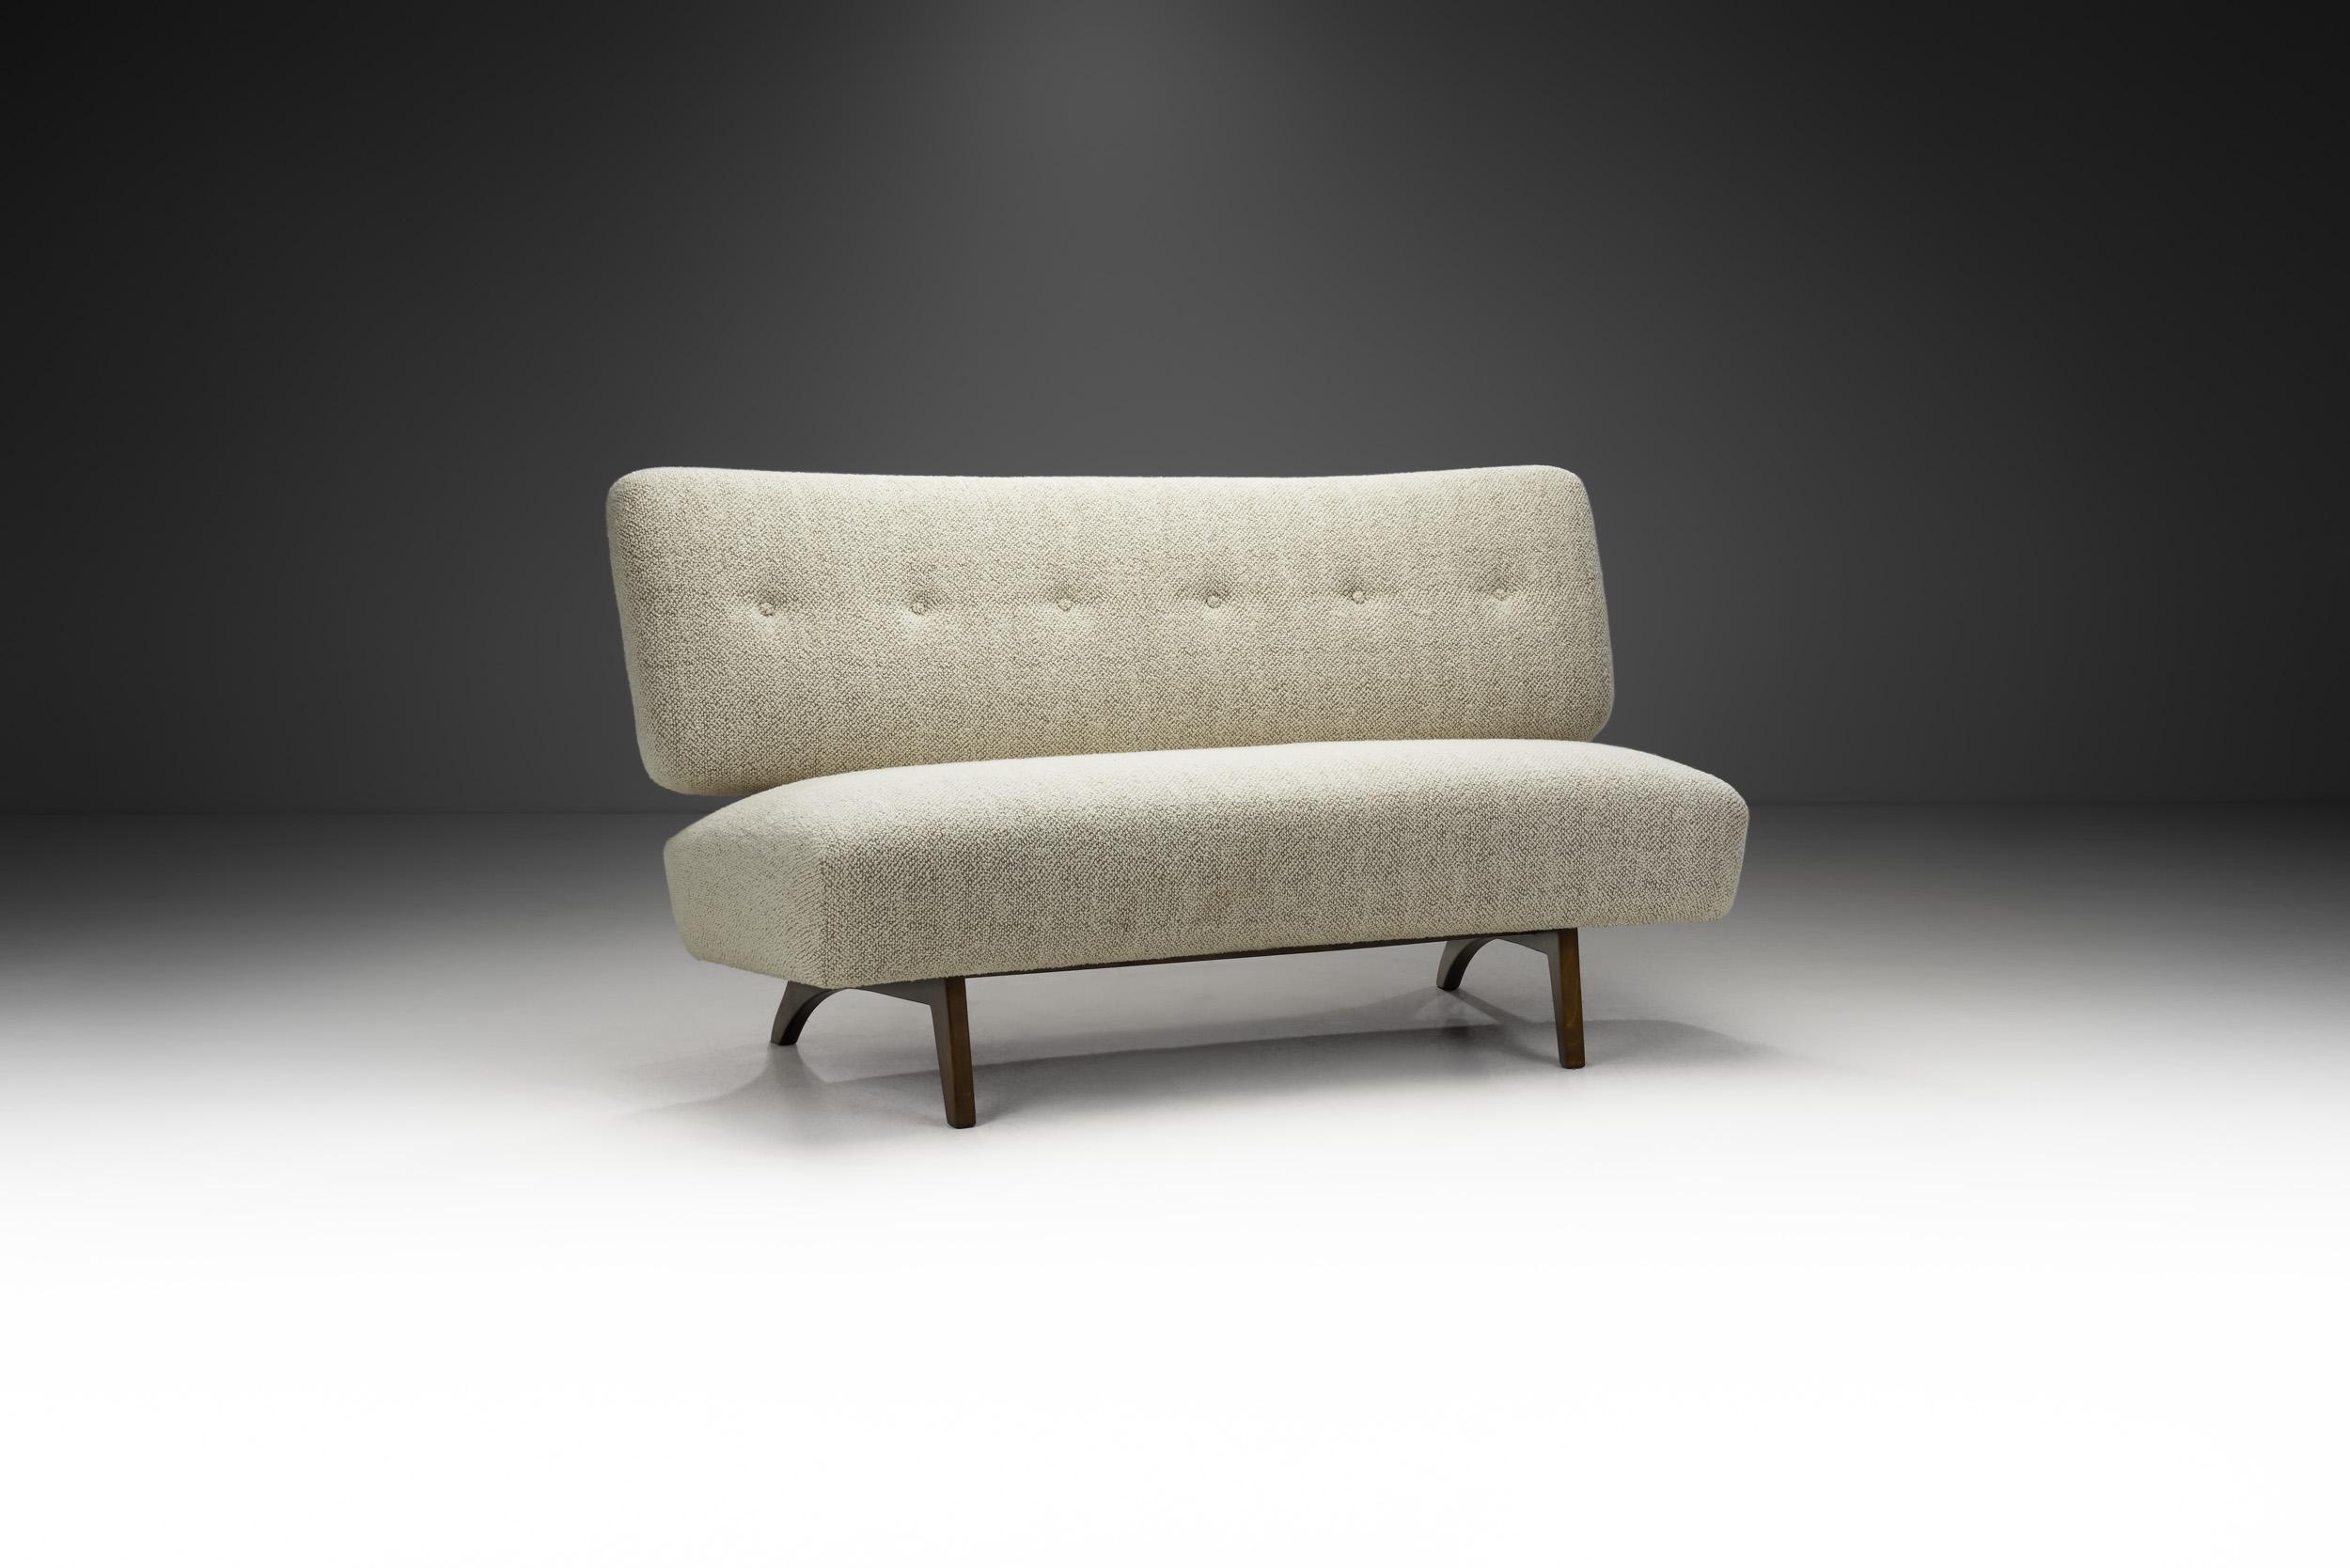 This wonderful commemoration of Finnish mid-century design is the Susanna sofa created by Lahti Lepokaulusto and designed in the 1950s by Oiva Parviainen. Famous for its suspension and structure, this model quickly became beloved in Finland.

Due to